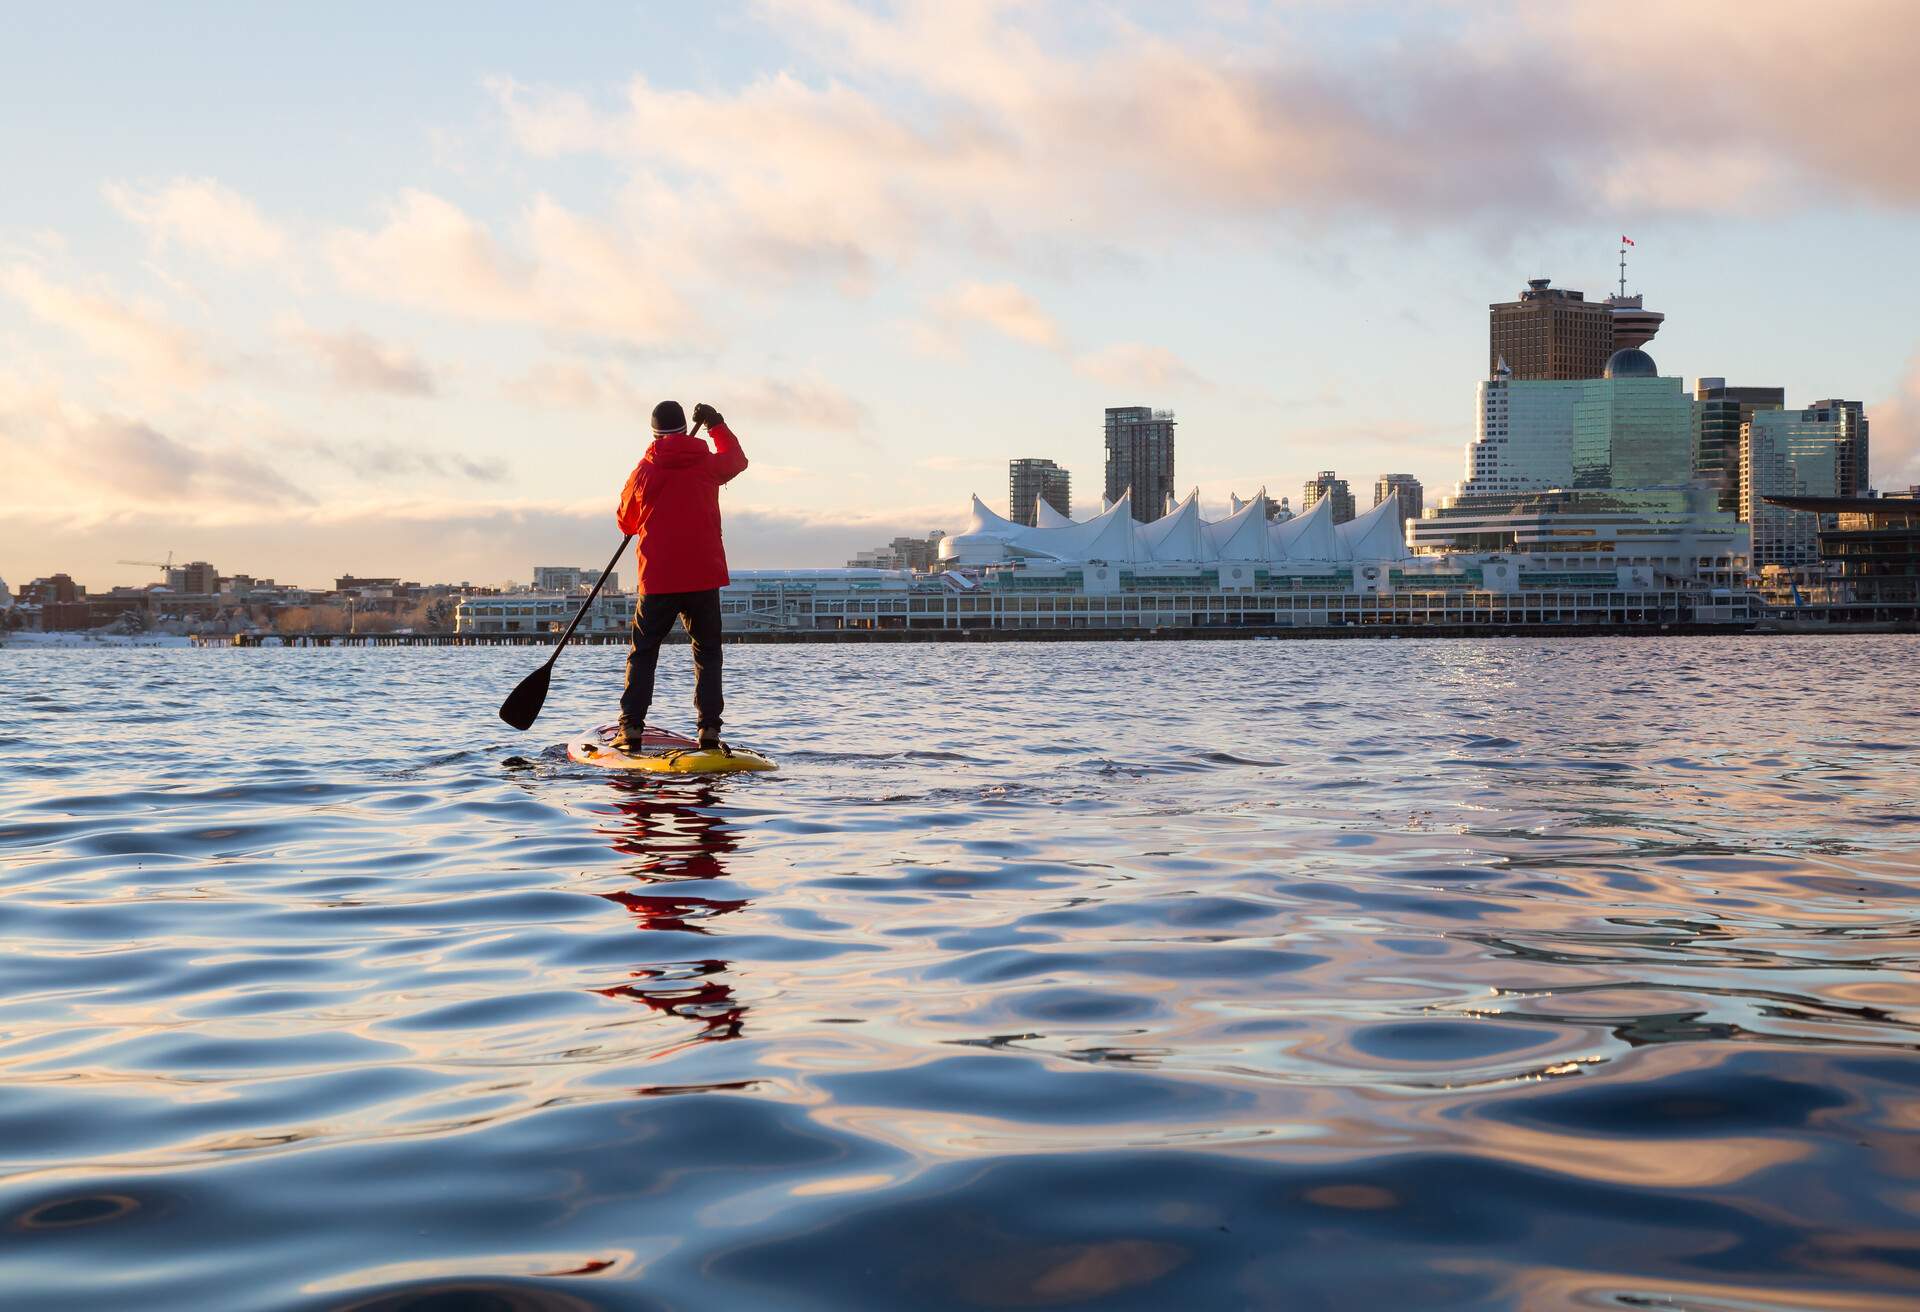 A man paddleboarding in the Burrard Inlet with the Canada Place in the background.